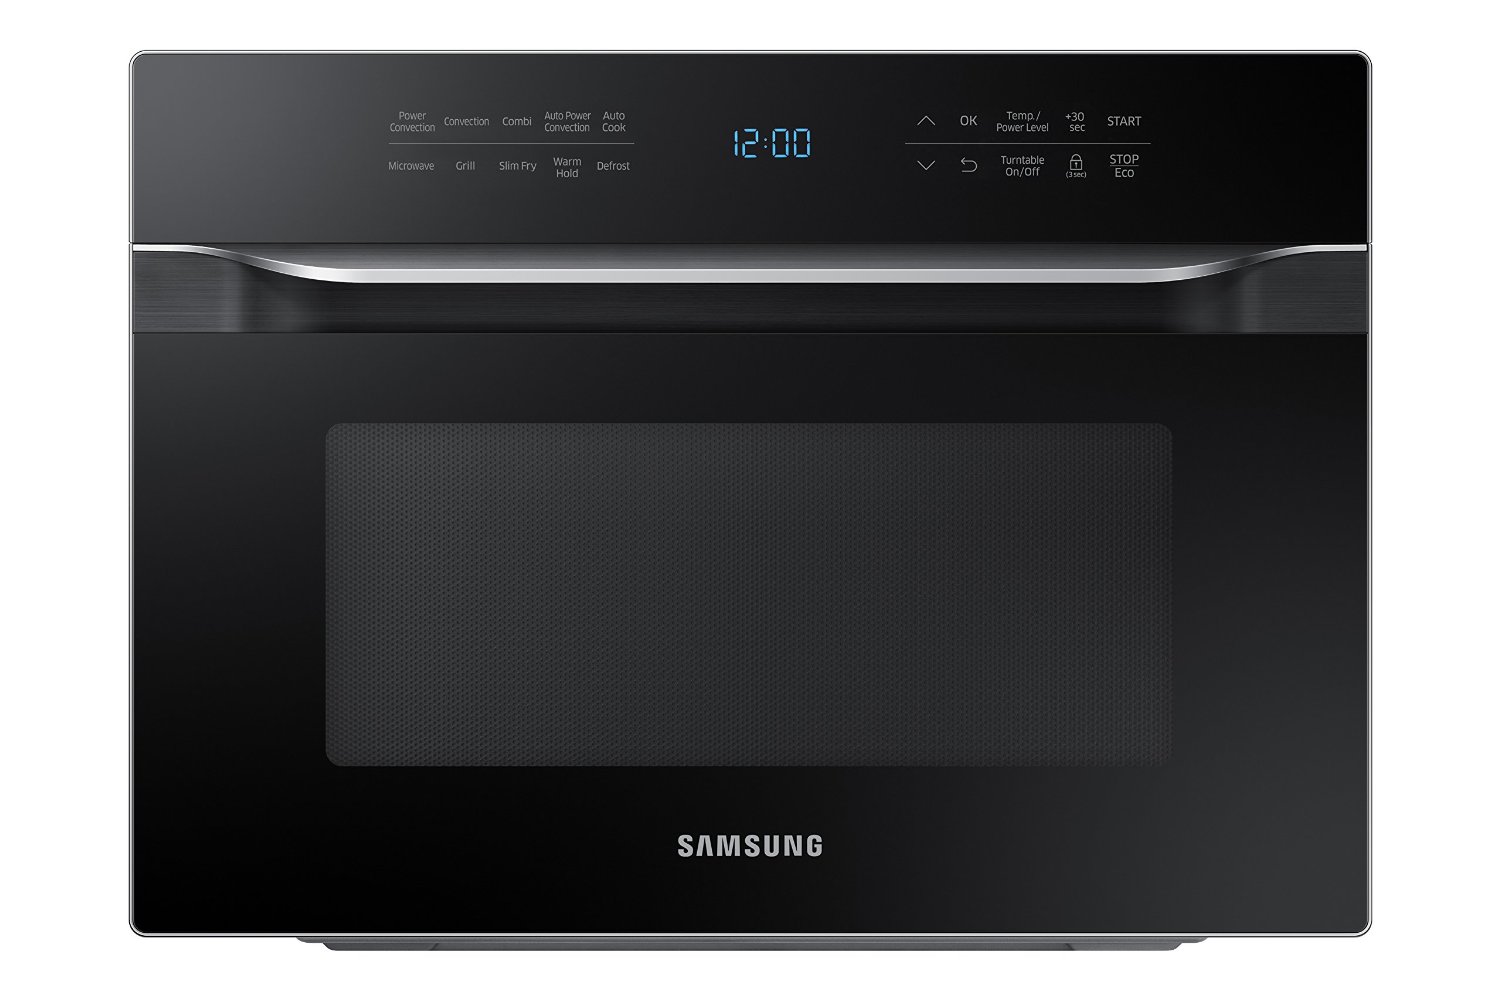 Samsung MC12J8035CT 1.2 cu. ft. Countertop Convection Microwave - Stainless Steel, Black